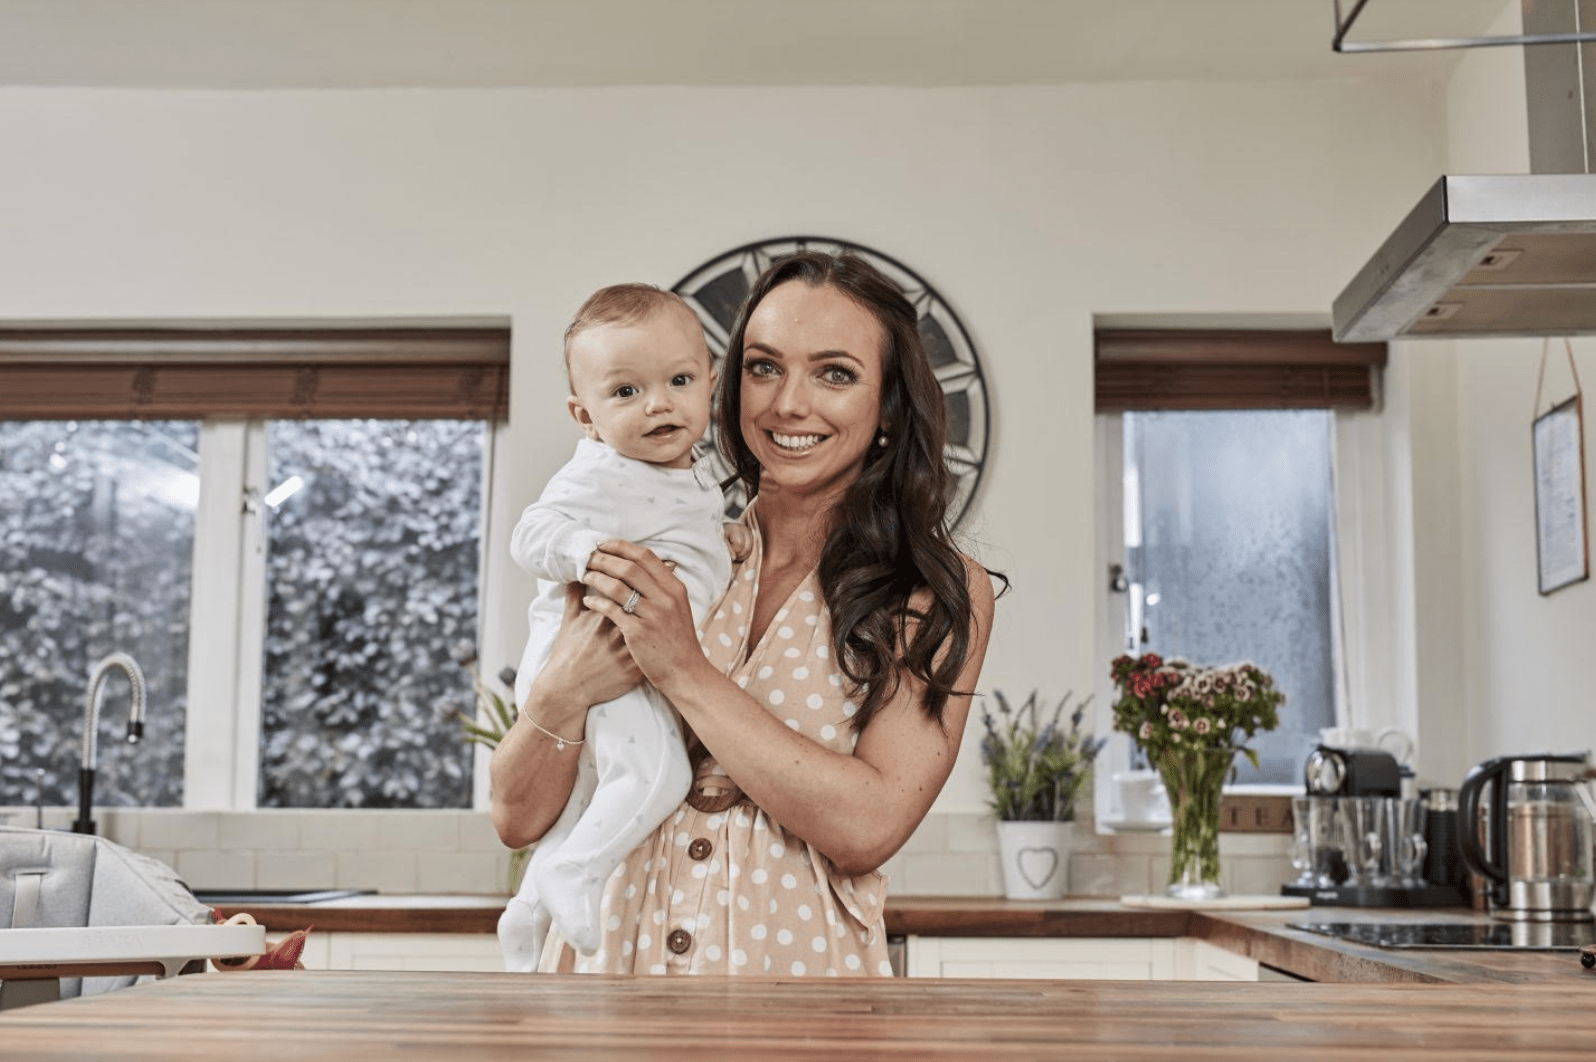 Nicola from Mummy Nutrition, holding her baby boy, stood in a kitchen